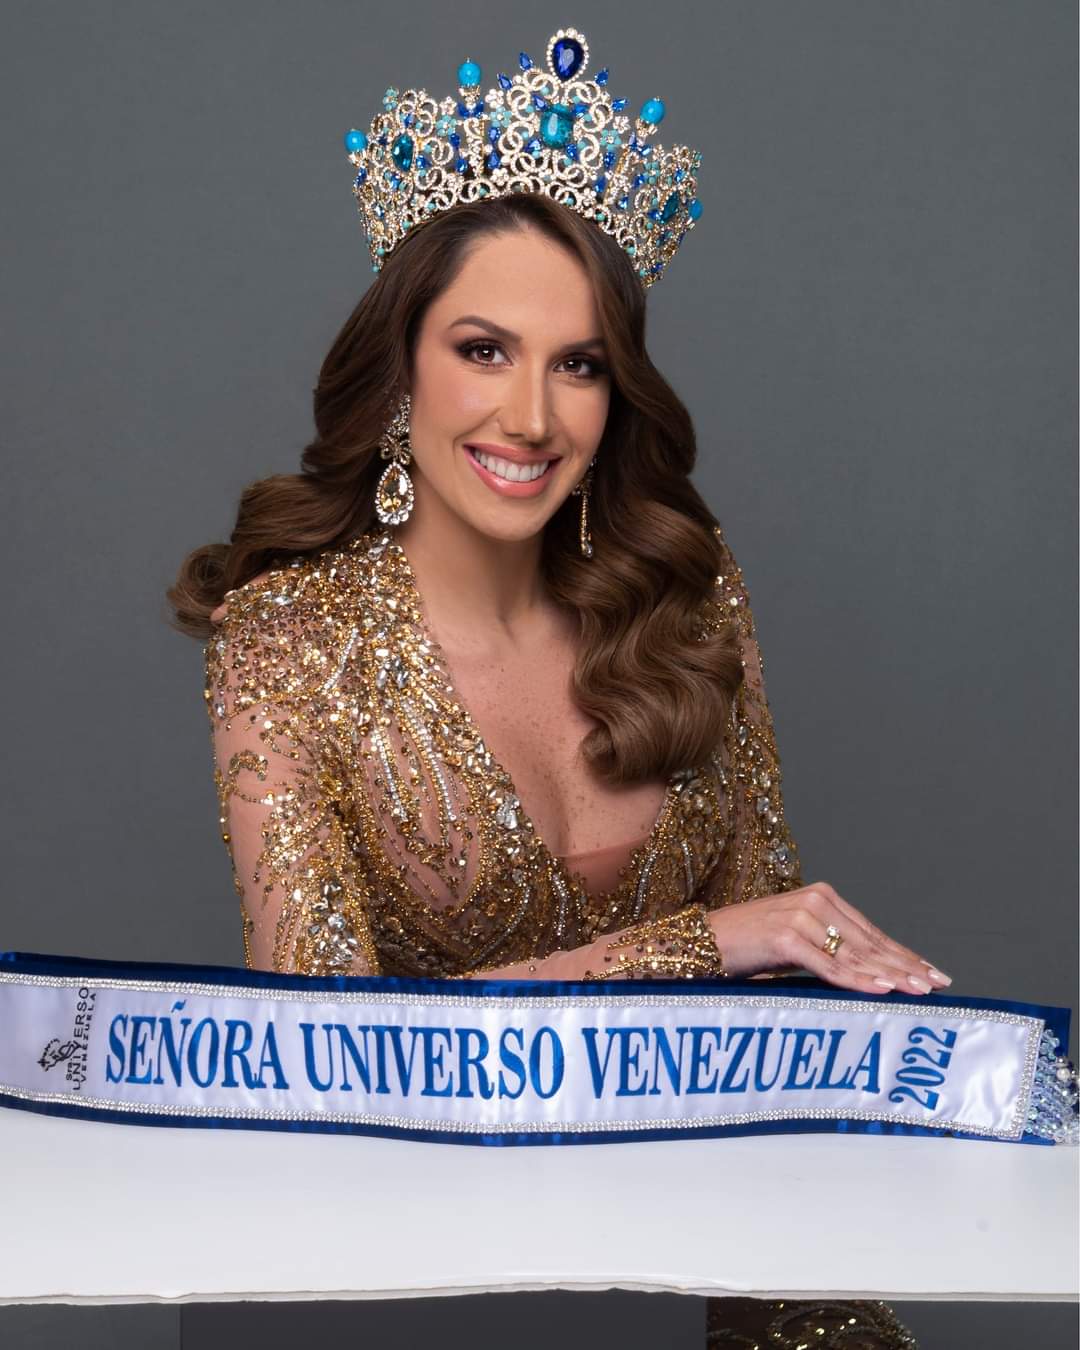 Mrs. Universe second runner-up Esther Suppa from Venezuela